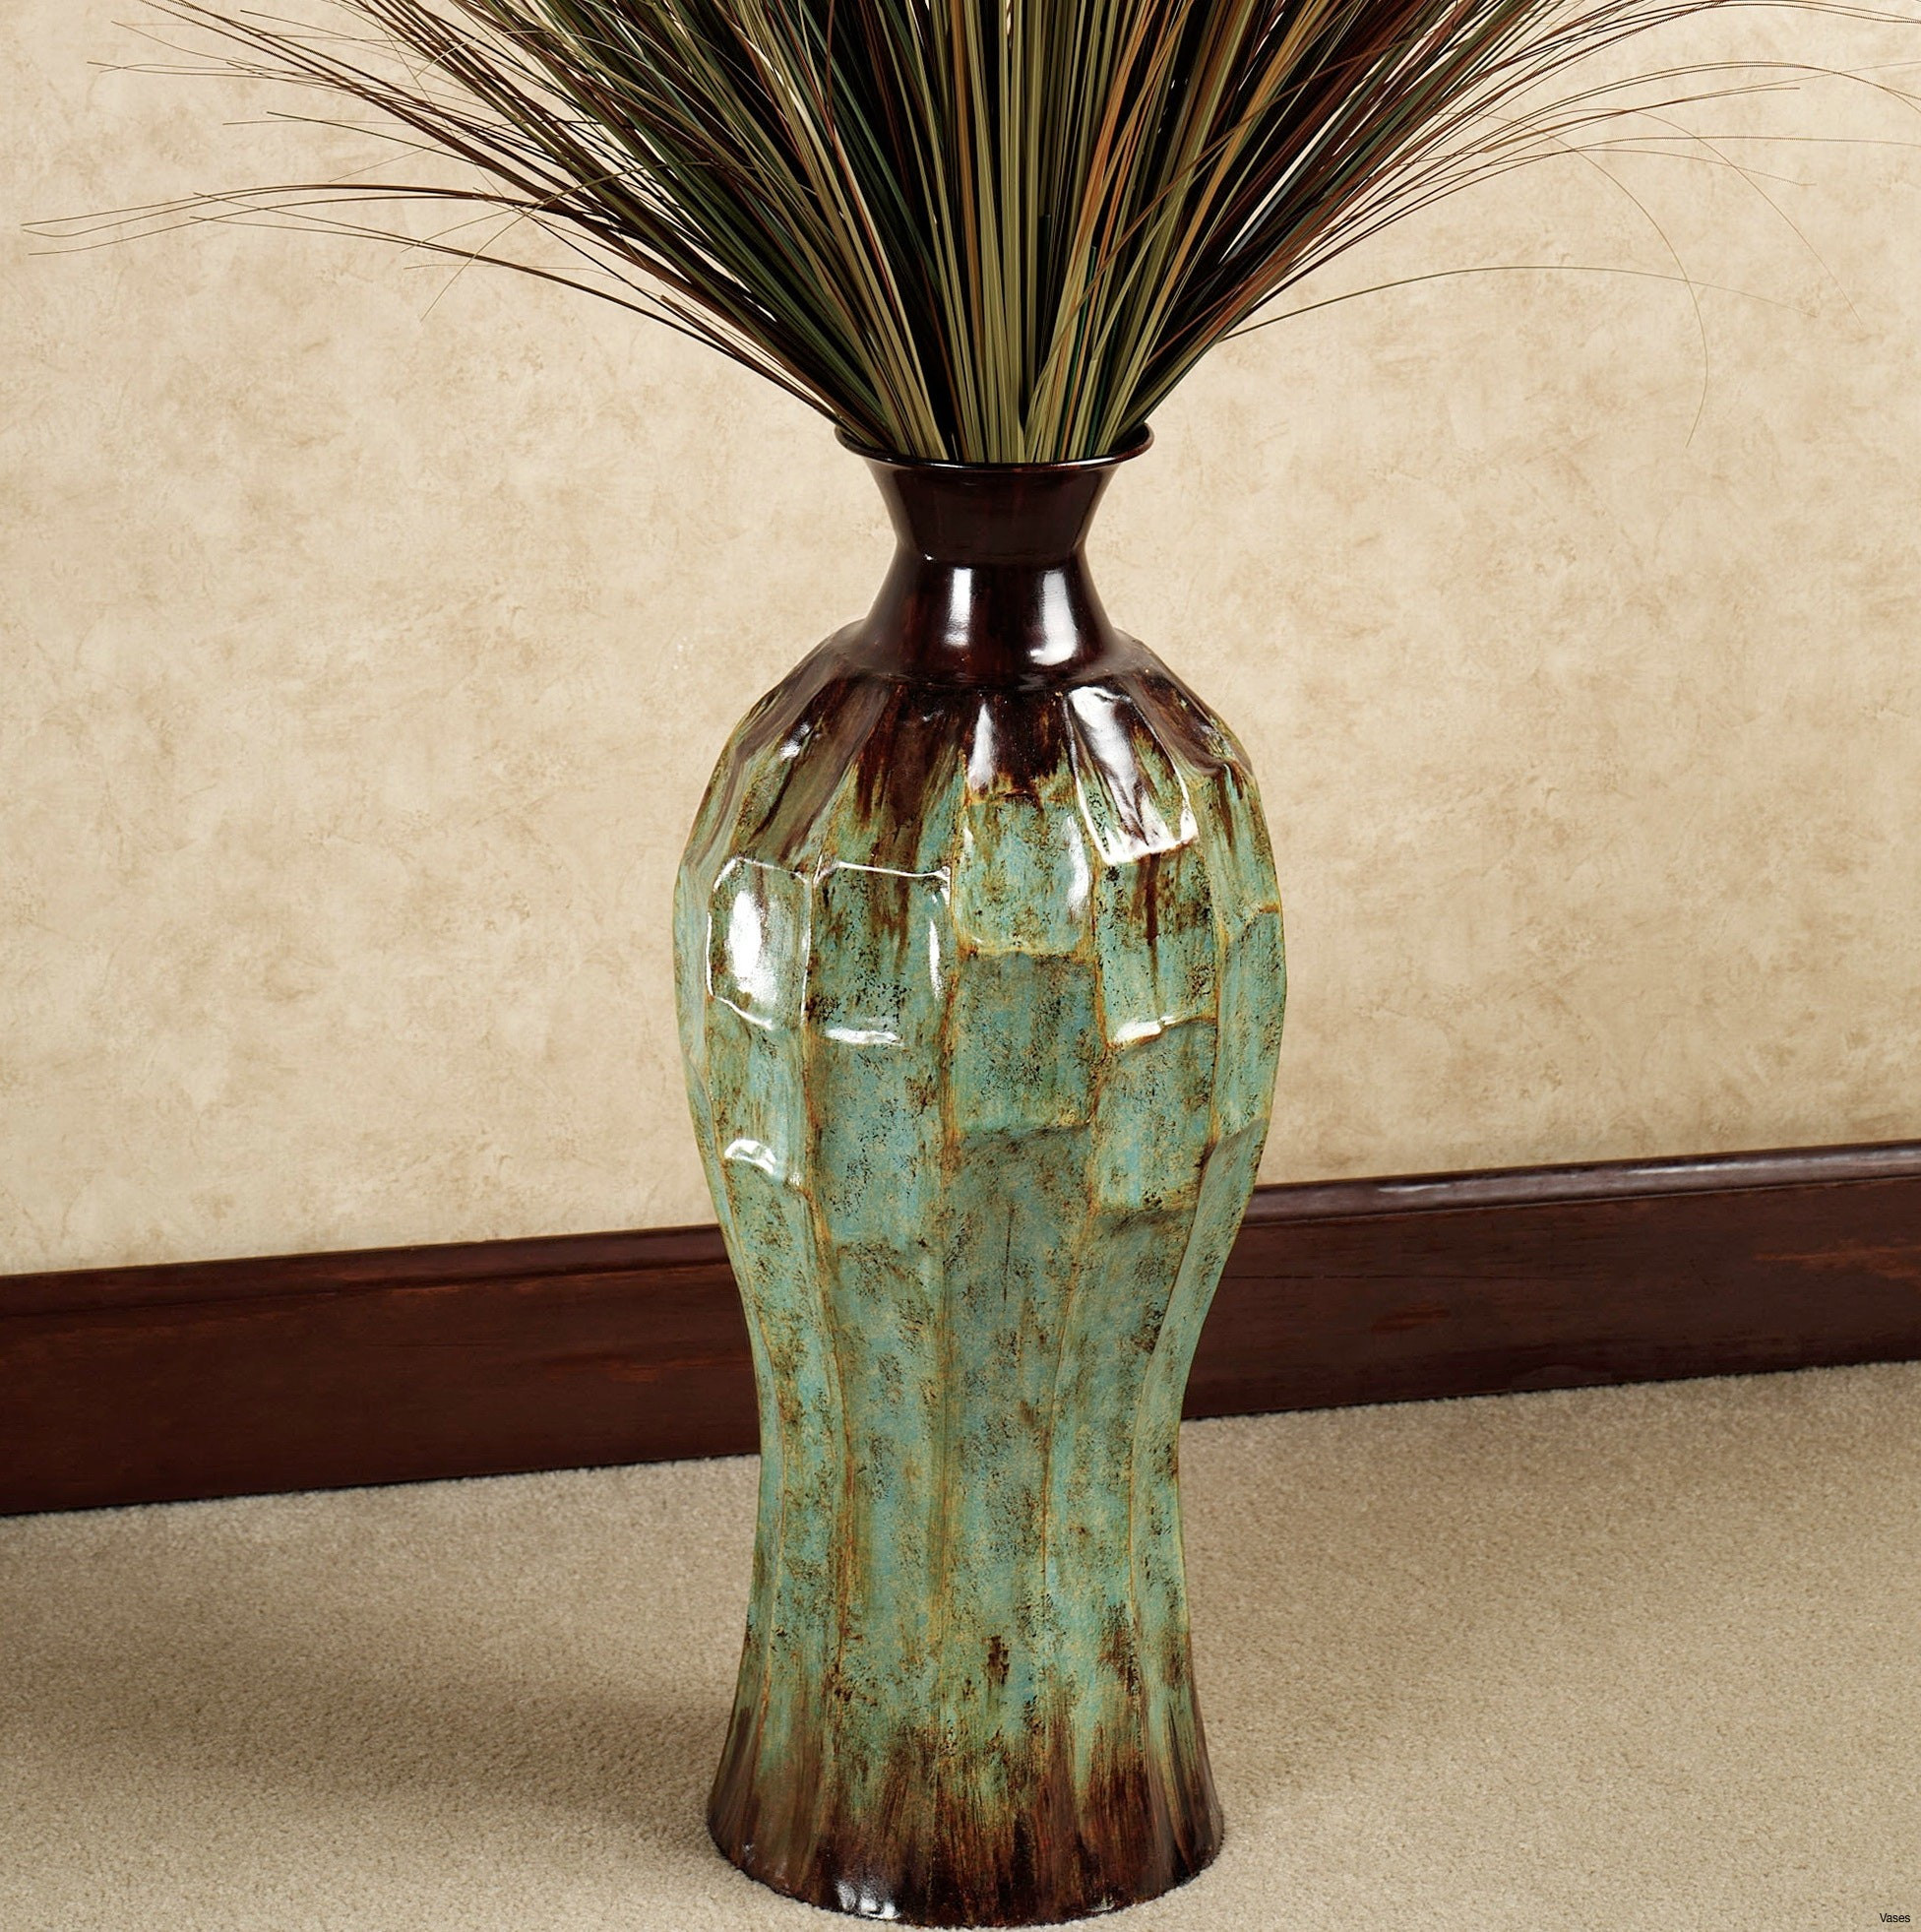 15 Amazing Cheap Wooden Vases 2024 free download cheap wooden vases of decorating ideas for tall vases awesome h vases giant floor vase i inside decorating ideas for tall vases fresh floor vase filler ideas decorationh vases tall decoratin